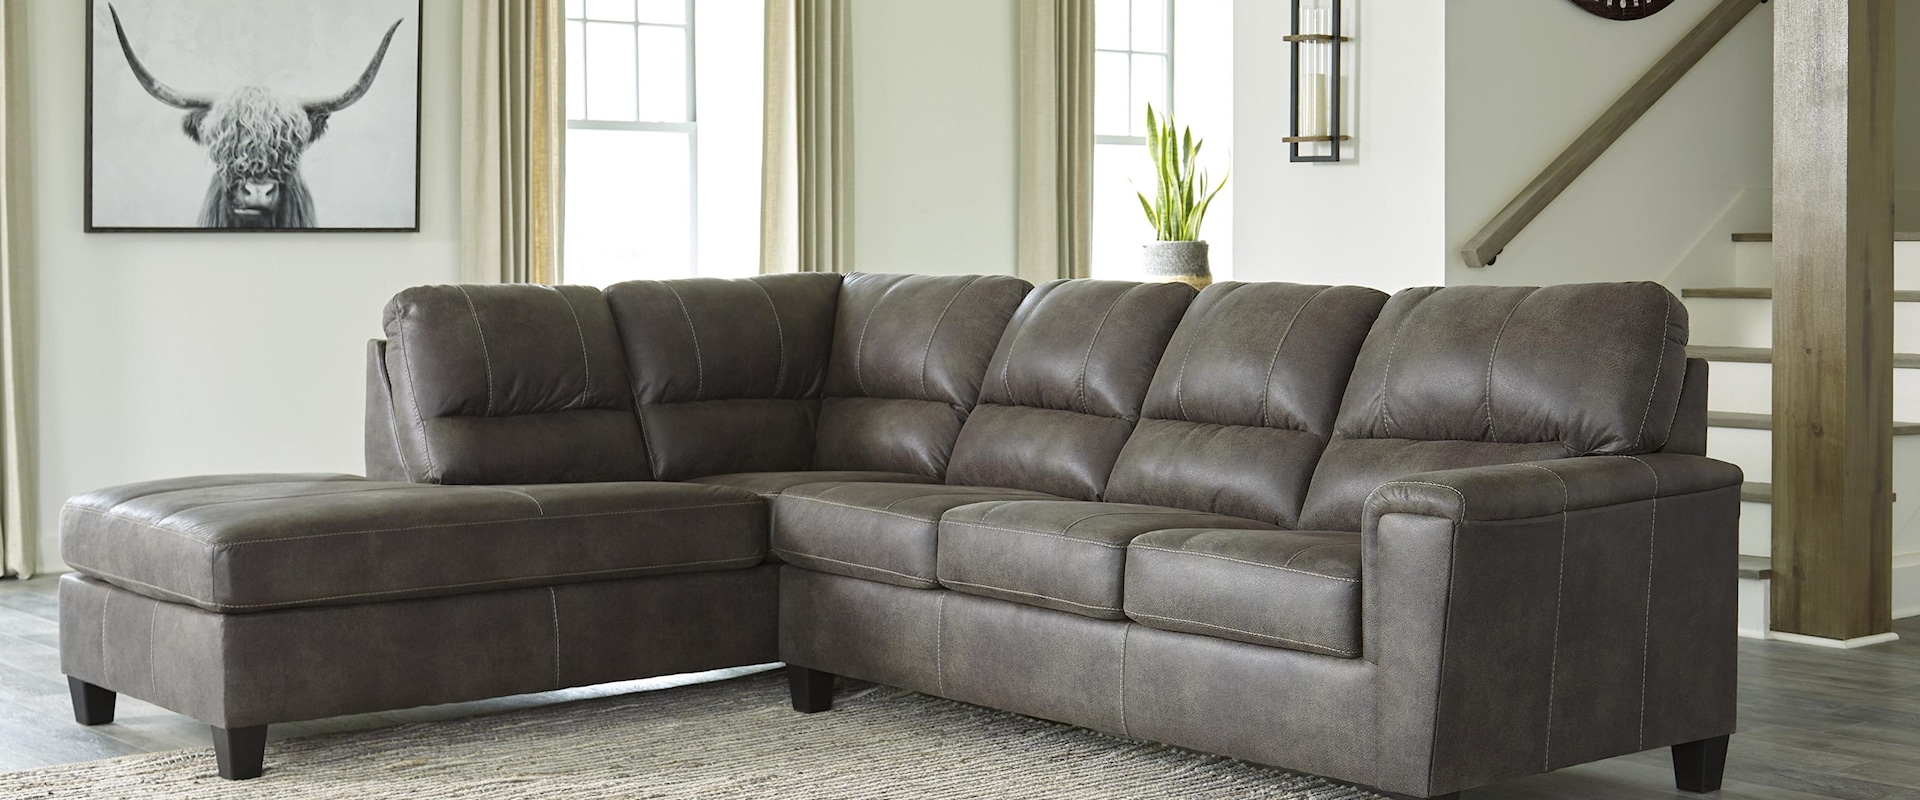 2 Piece Chaise Sectional and Recliner Set